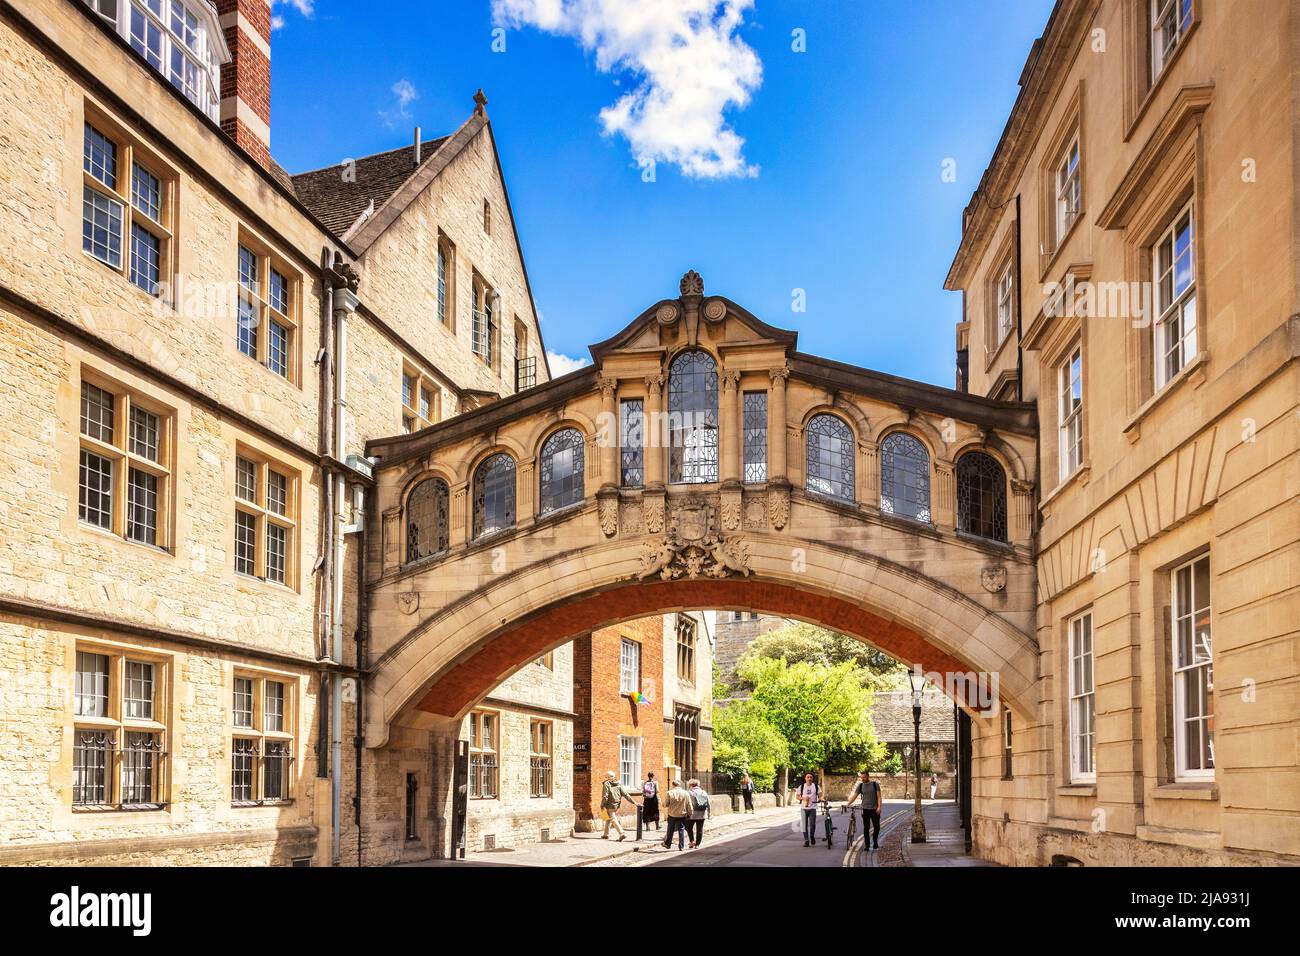 6 June 2019: Oxford, UK - Hertford Bridge, popularly known as the Bridge of Sighs, joins parts of Hertford College across New College Lane. In the... Stock Photo